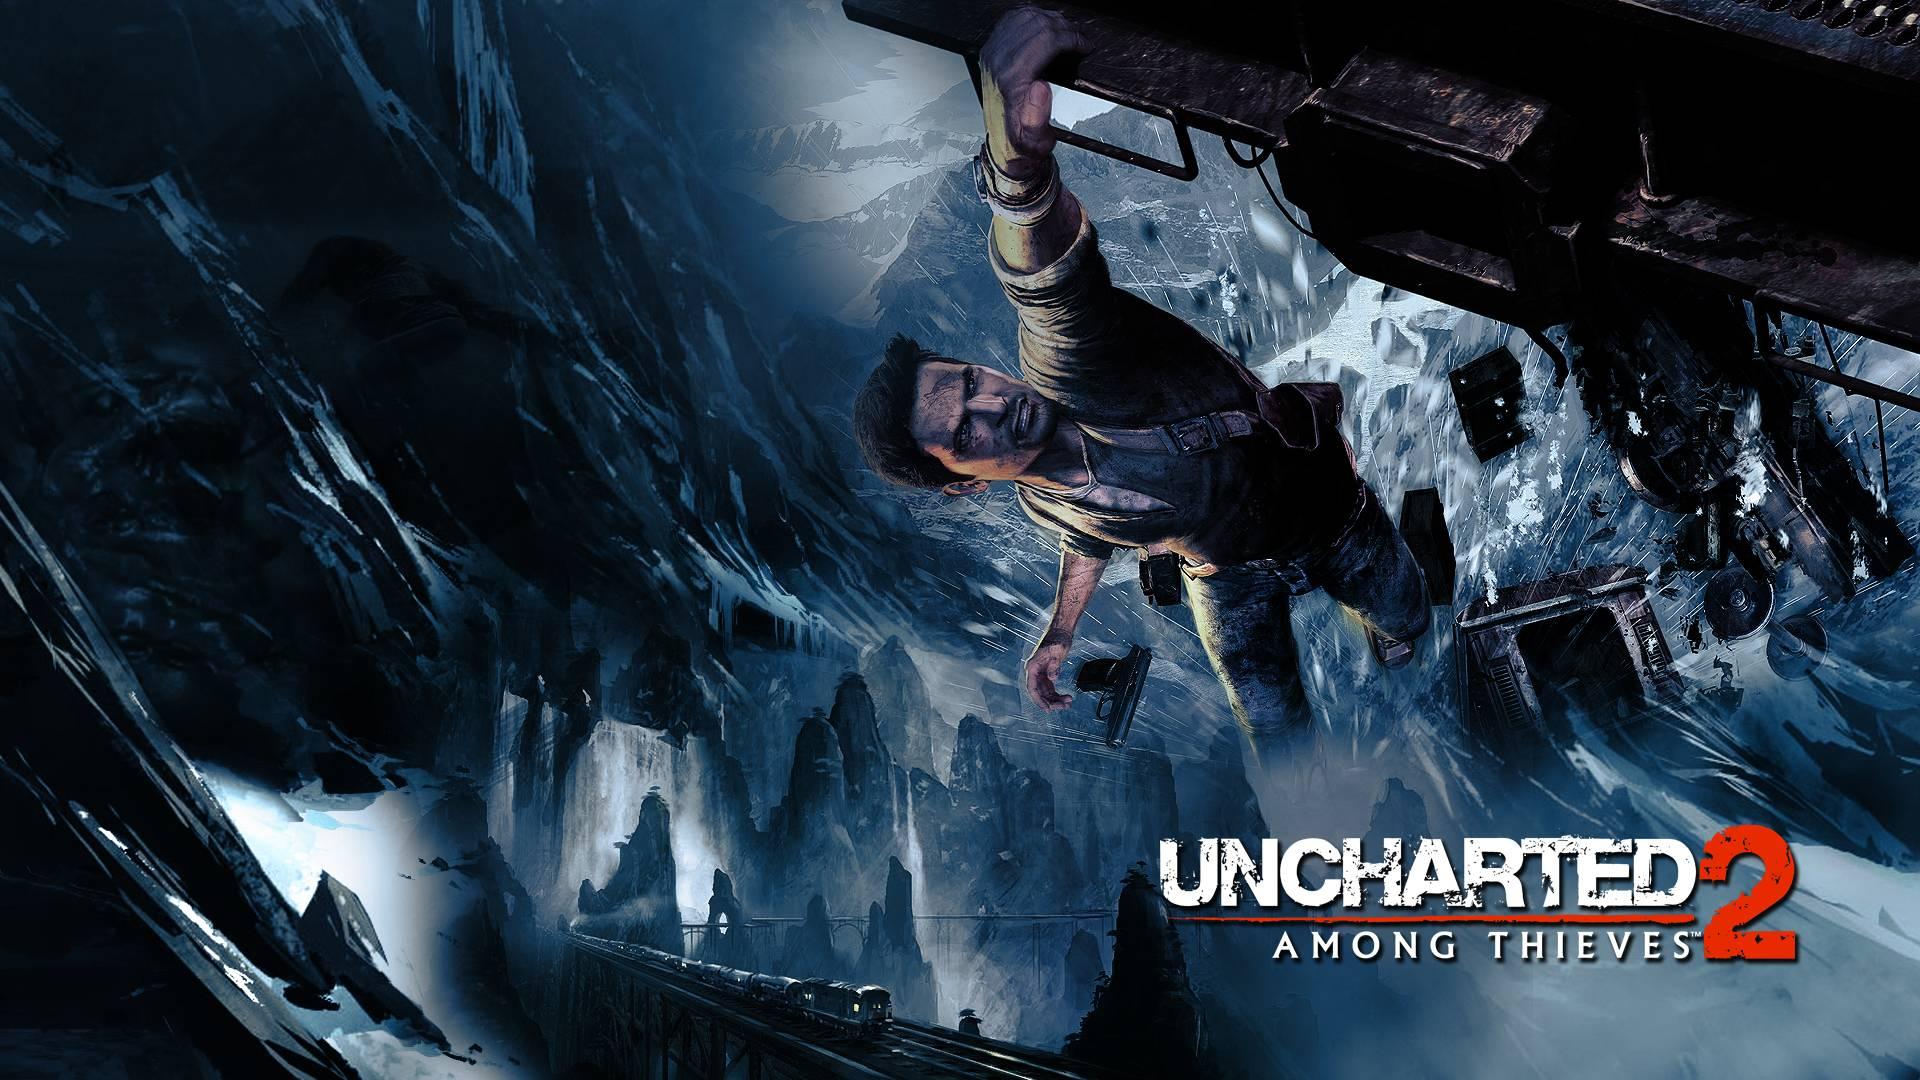 Uncharted 2 Among Thieves Wallpaper Hd